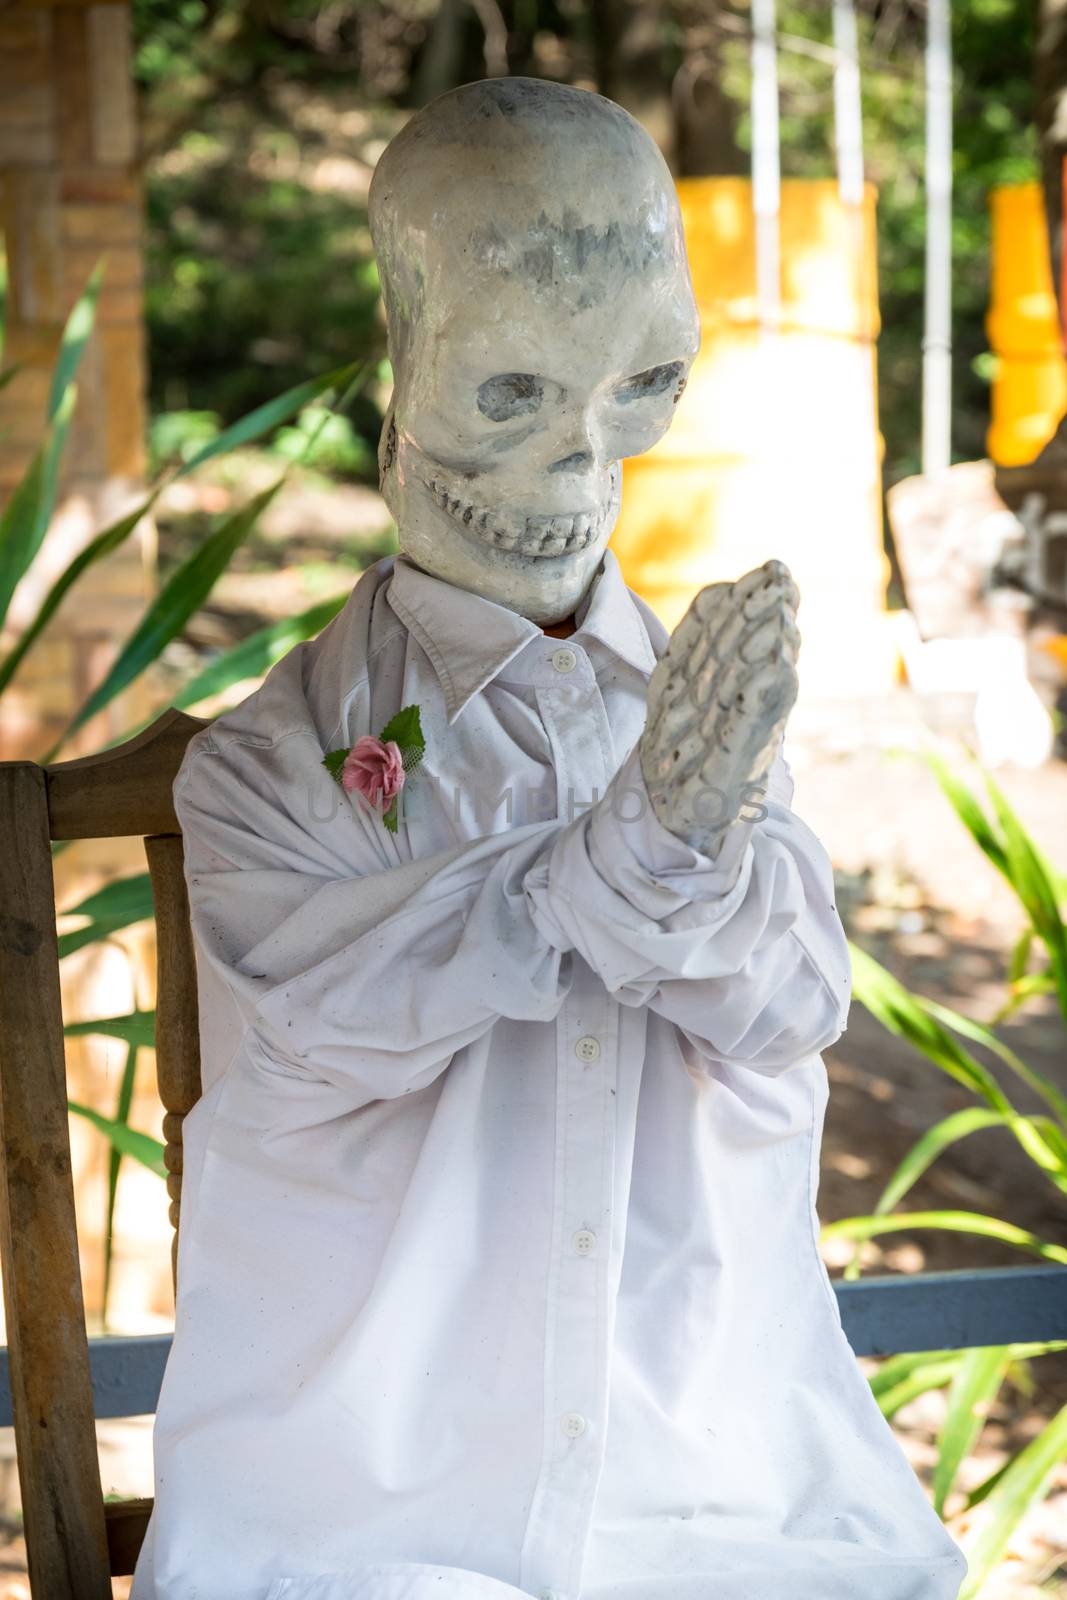 Skeleton wearing a white shirt in the temple.